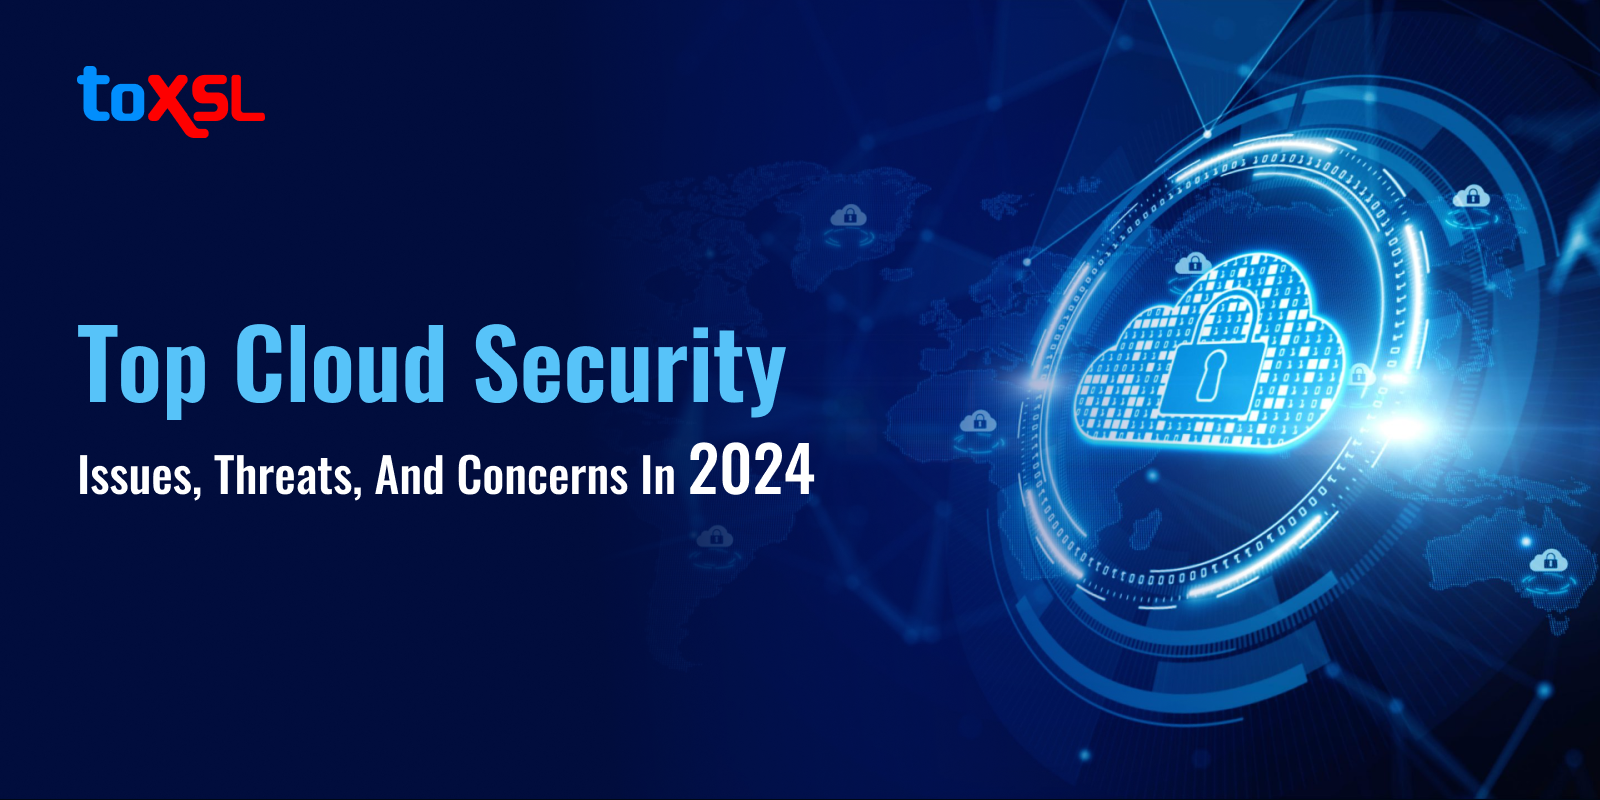 Top Cloud Security Issues, Threats, And Concerns In 2023